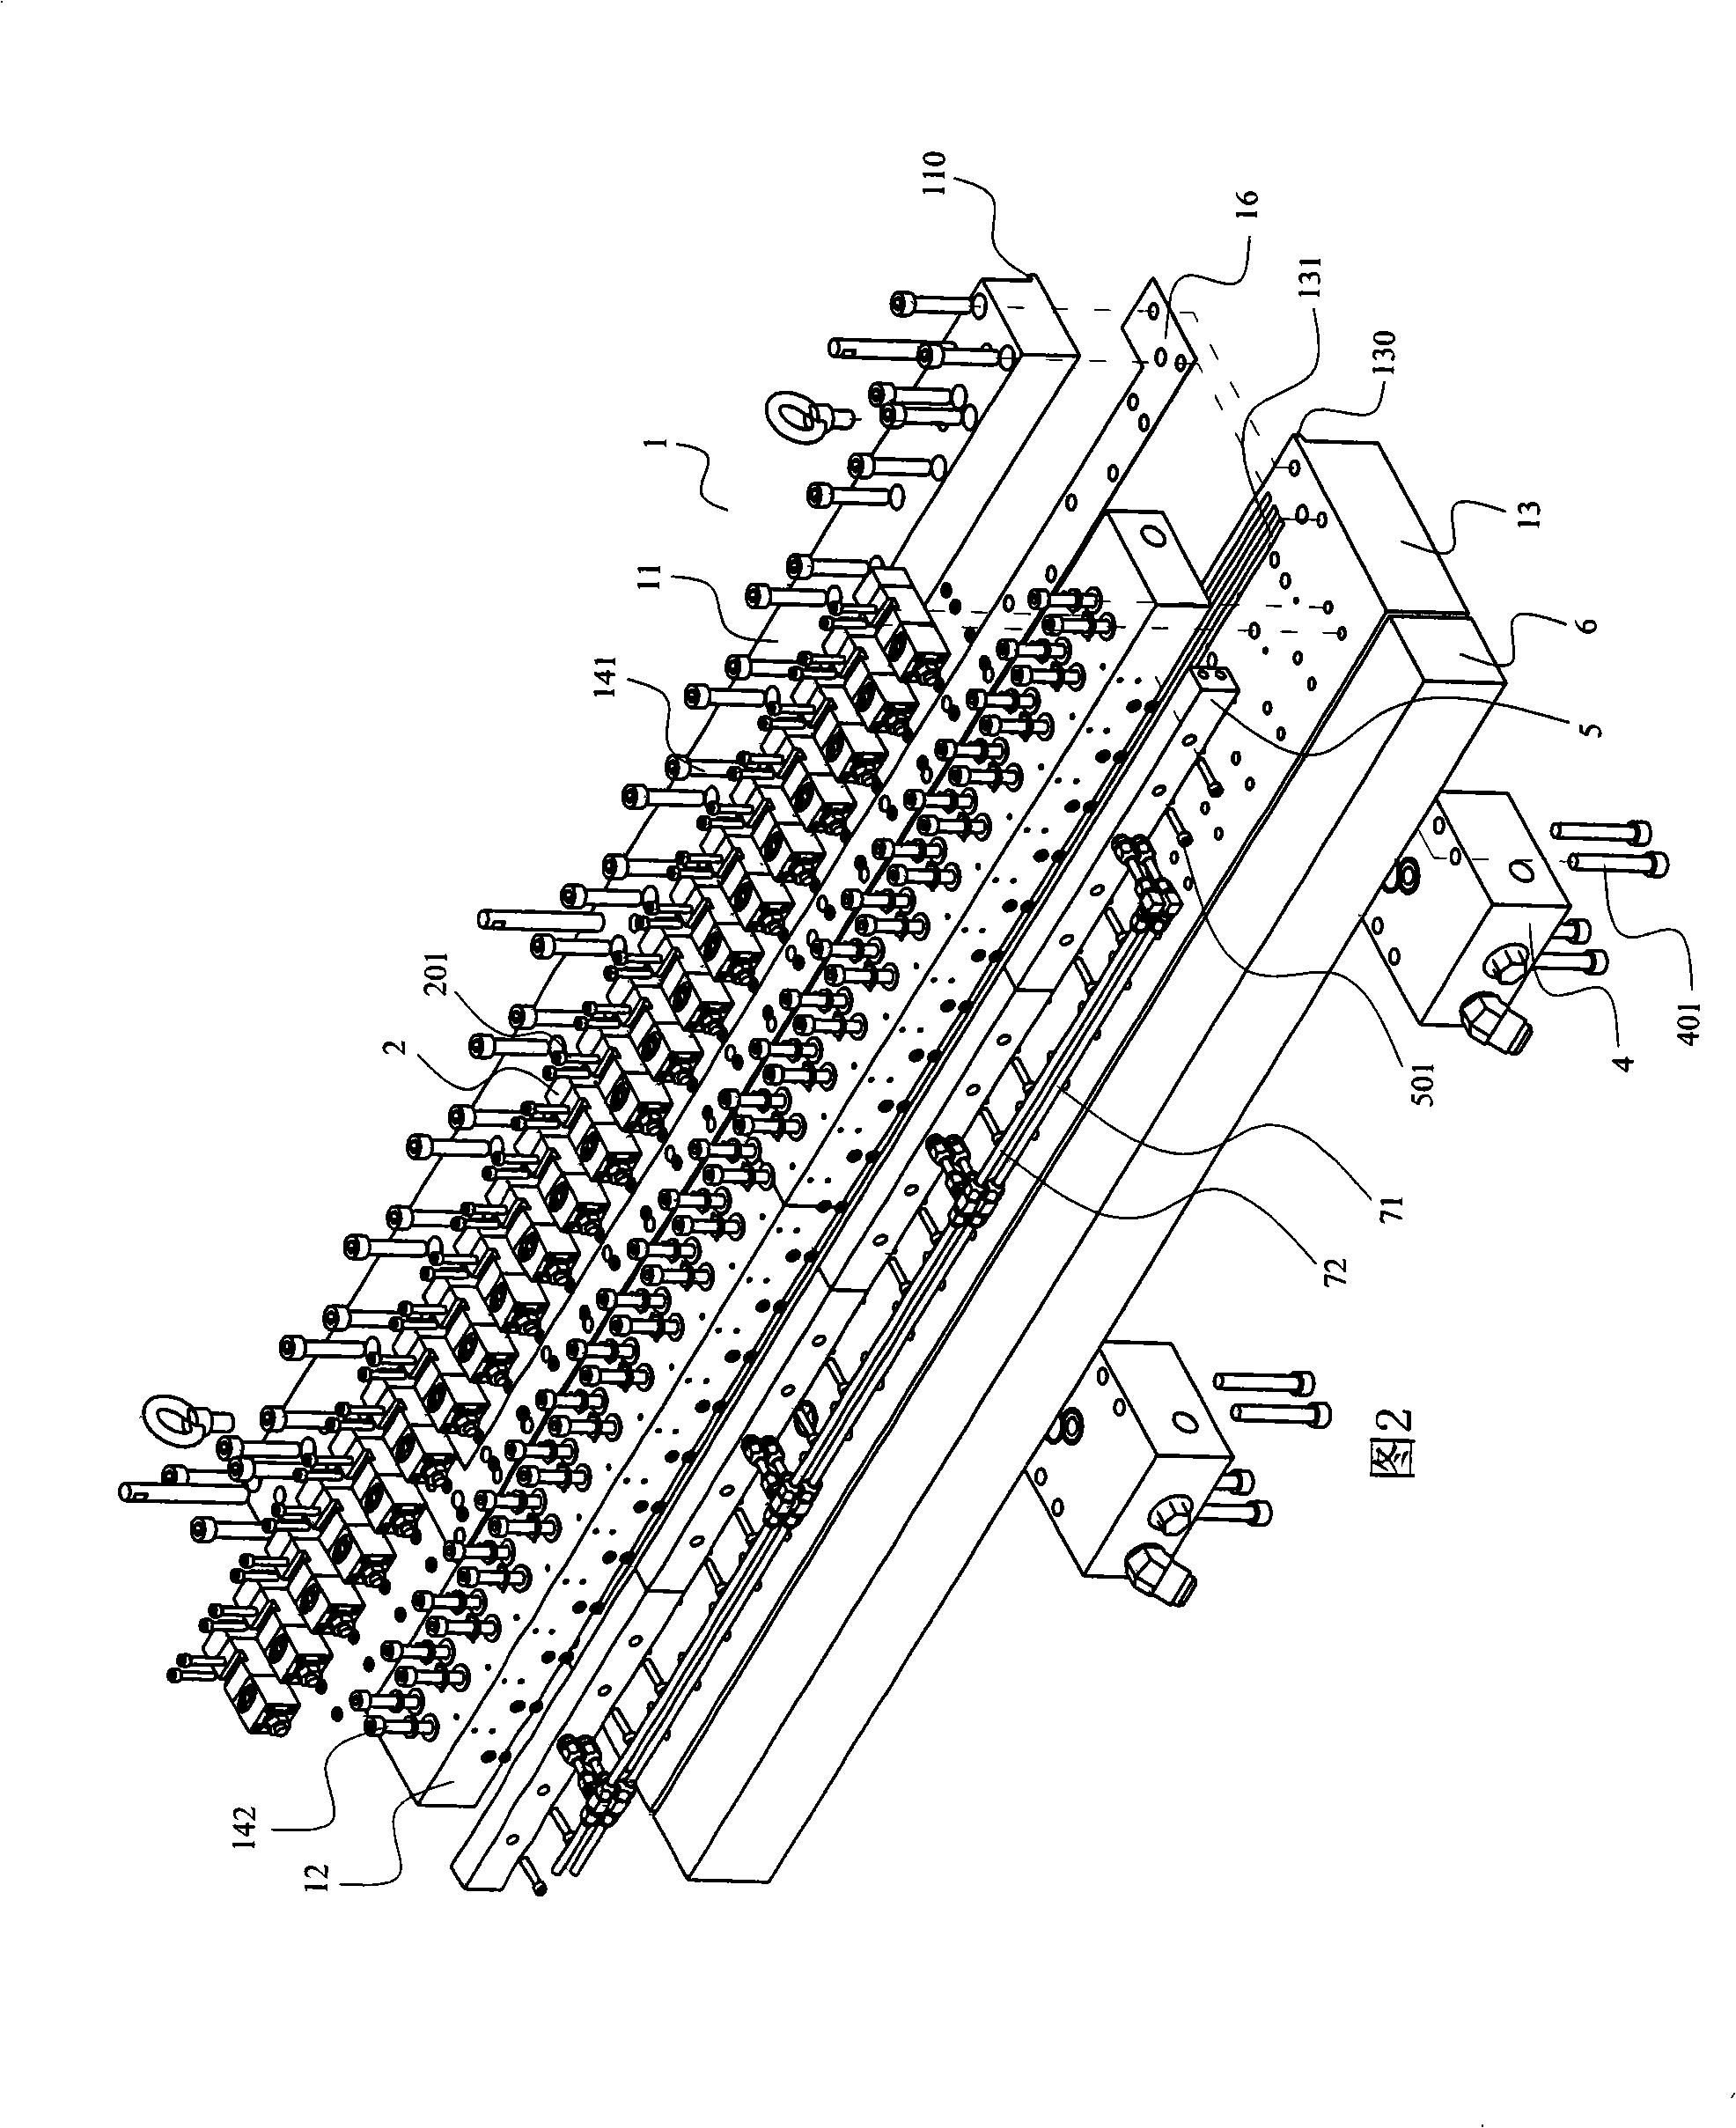 Narrow slit type coating mold and method for producing the same